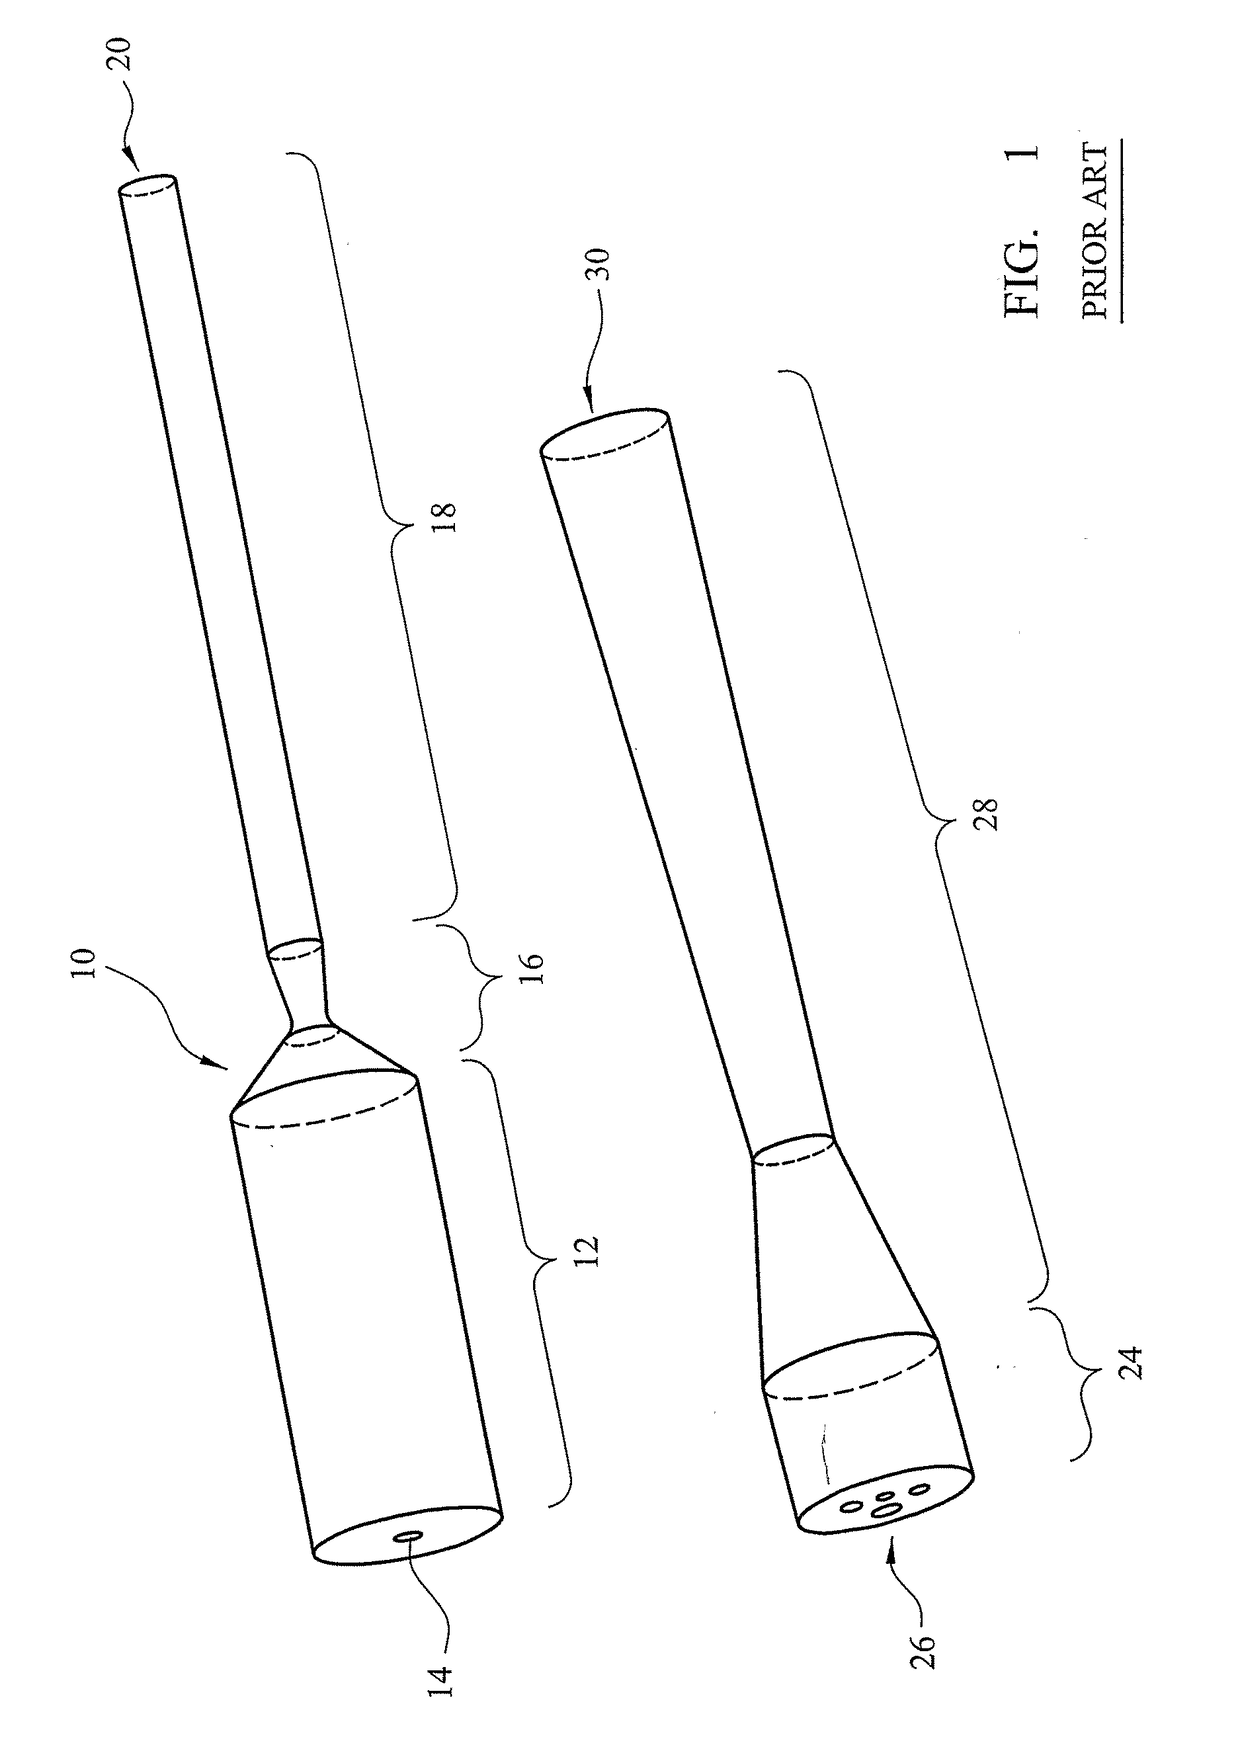 Nozzle for a thermal spray gun and method of thermal spraying